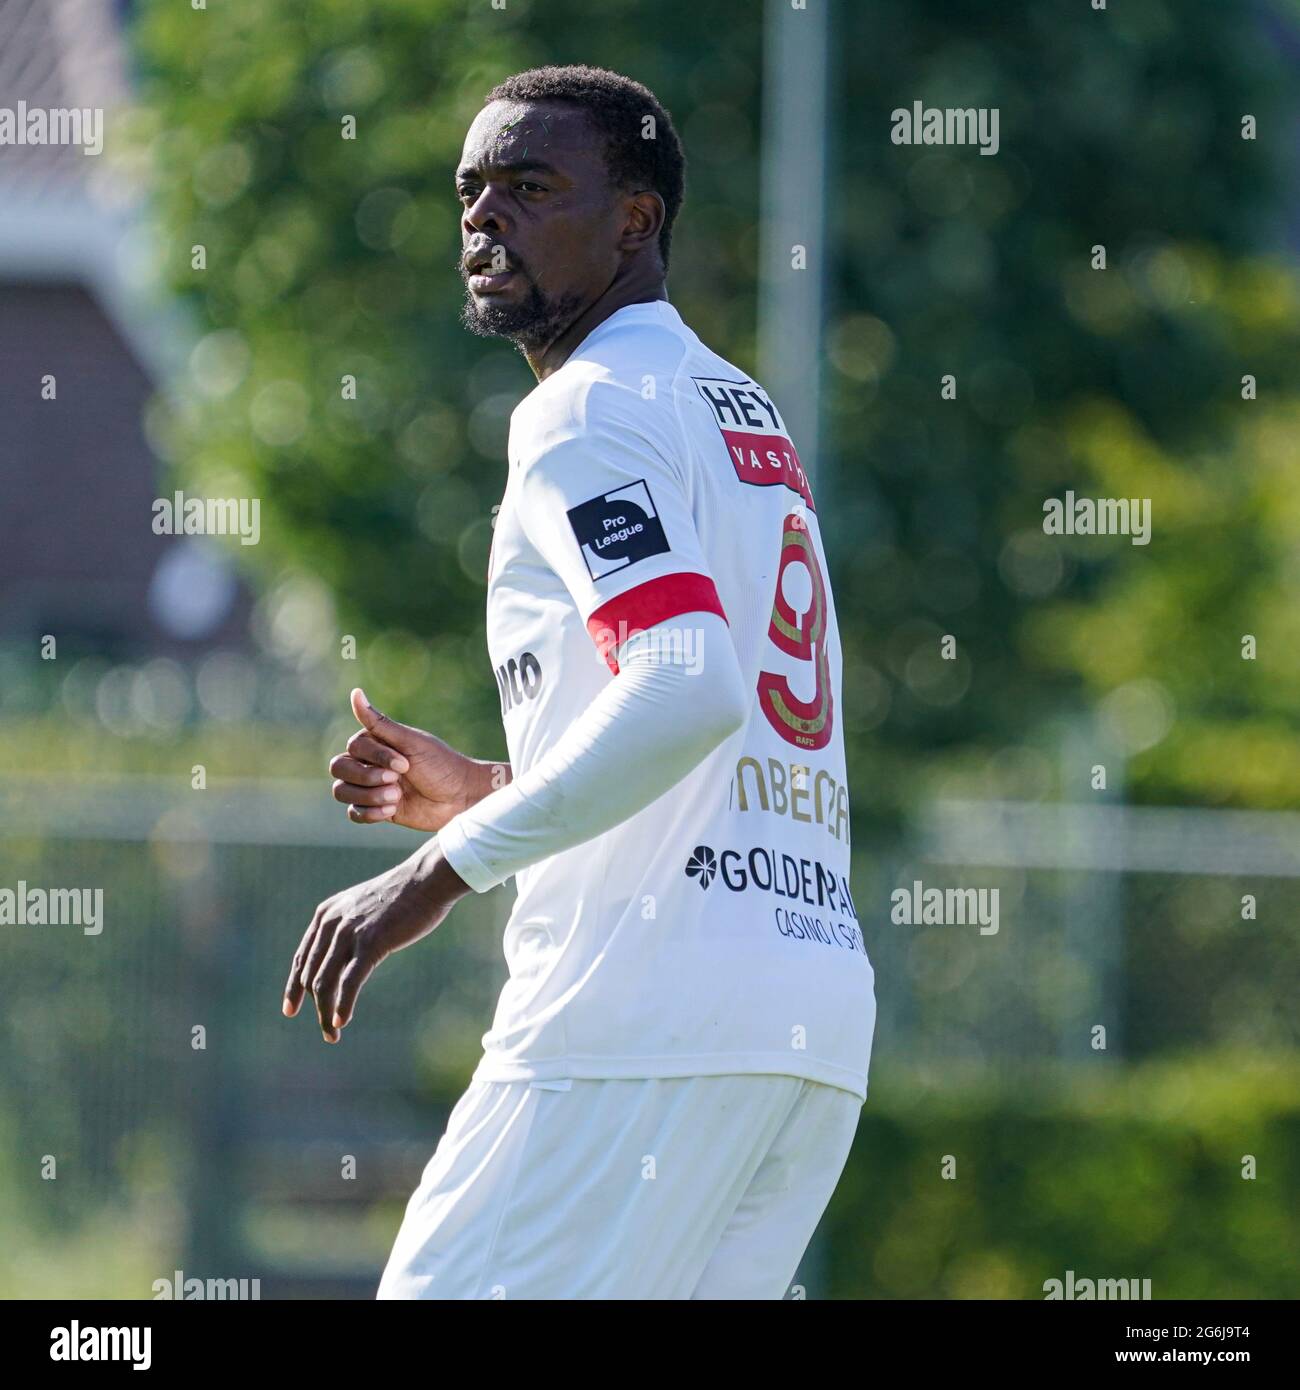 Aek Fc High Resolution Stock Photography and Images - Alamy